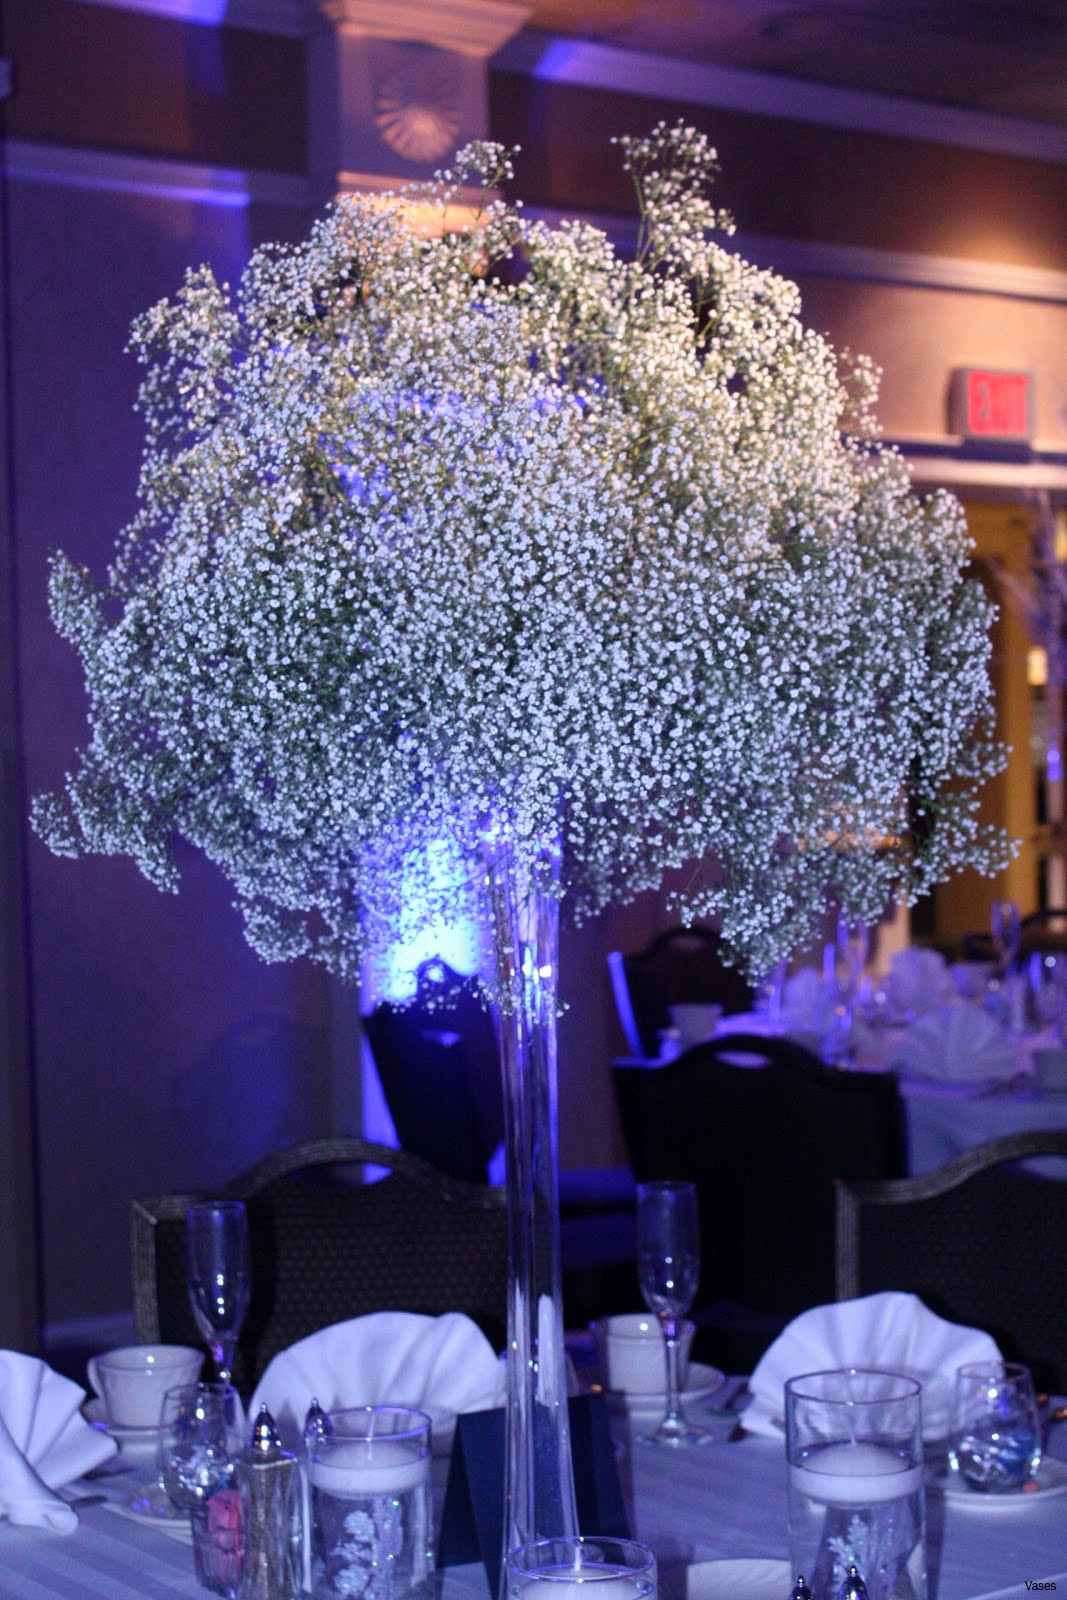 11 Ideal Used Wedding Centerpiece Vases for Sale 2022 free download used wedding centerpiece vases for sale of 39 luxury image of cheap wedding centerpieces ideas wedding news inside cheap wedding centerpieces ideas best of cheap wedding reception decoration